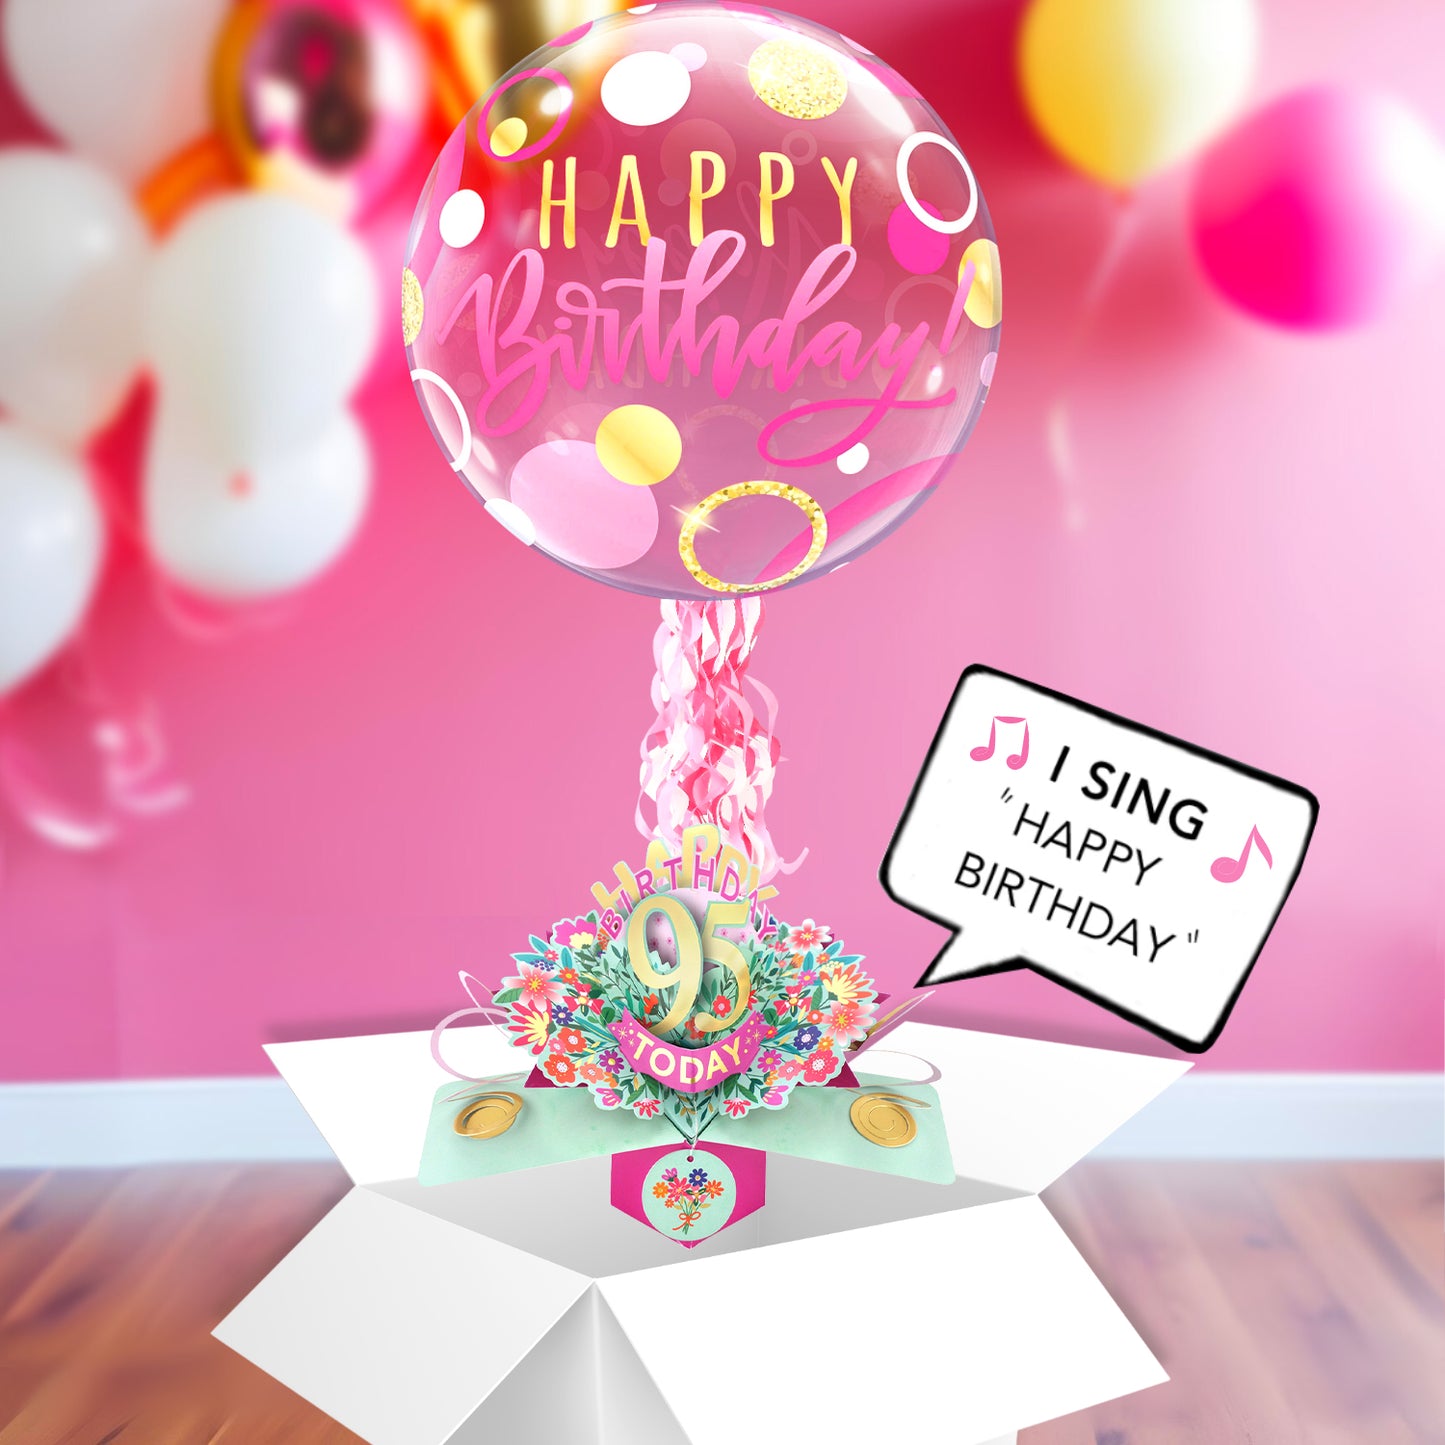 95th Birthday Pop Up Card & Musical Balloon Surprise Delivered In A Box For Her